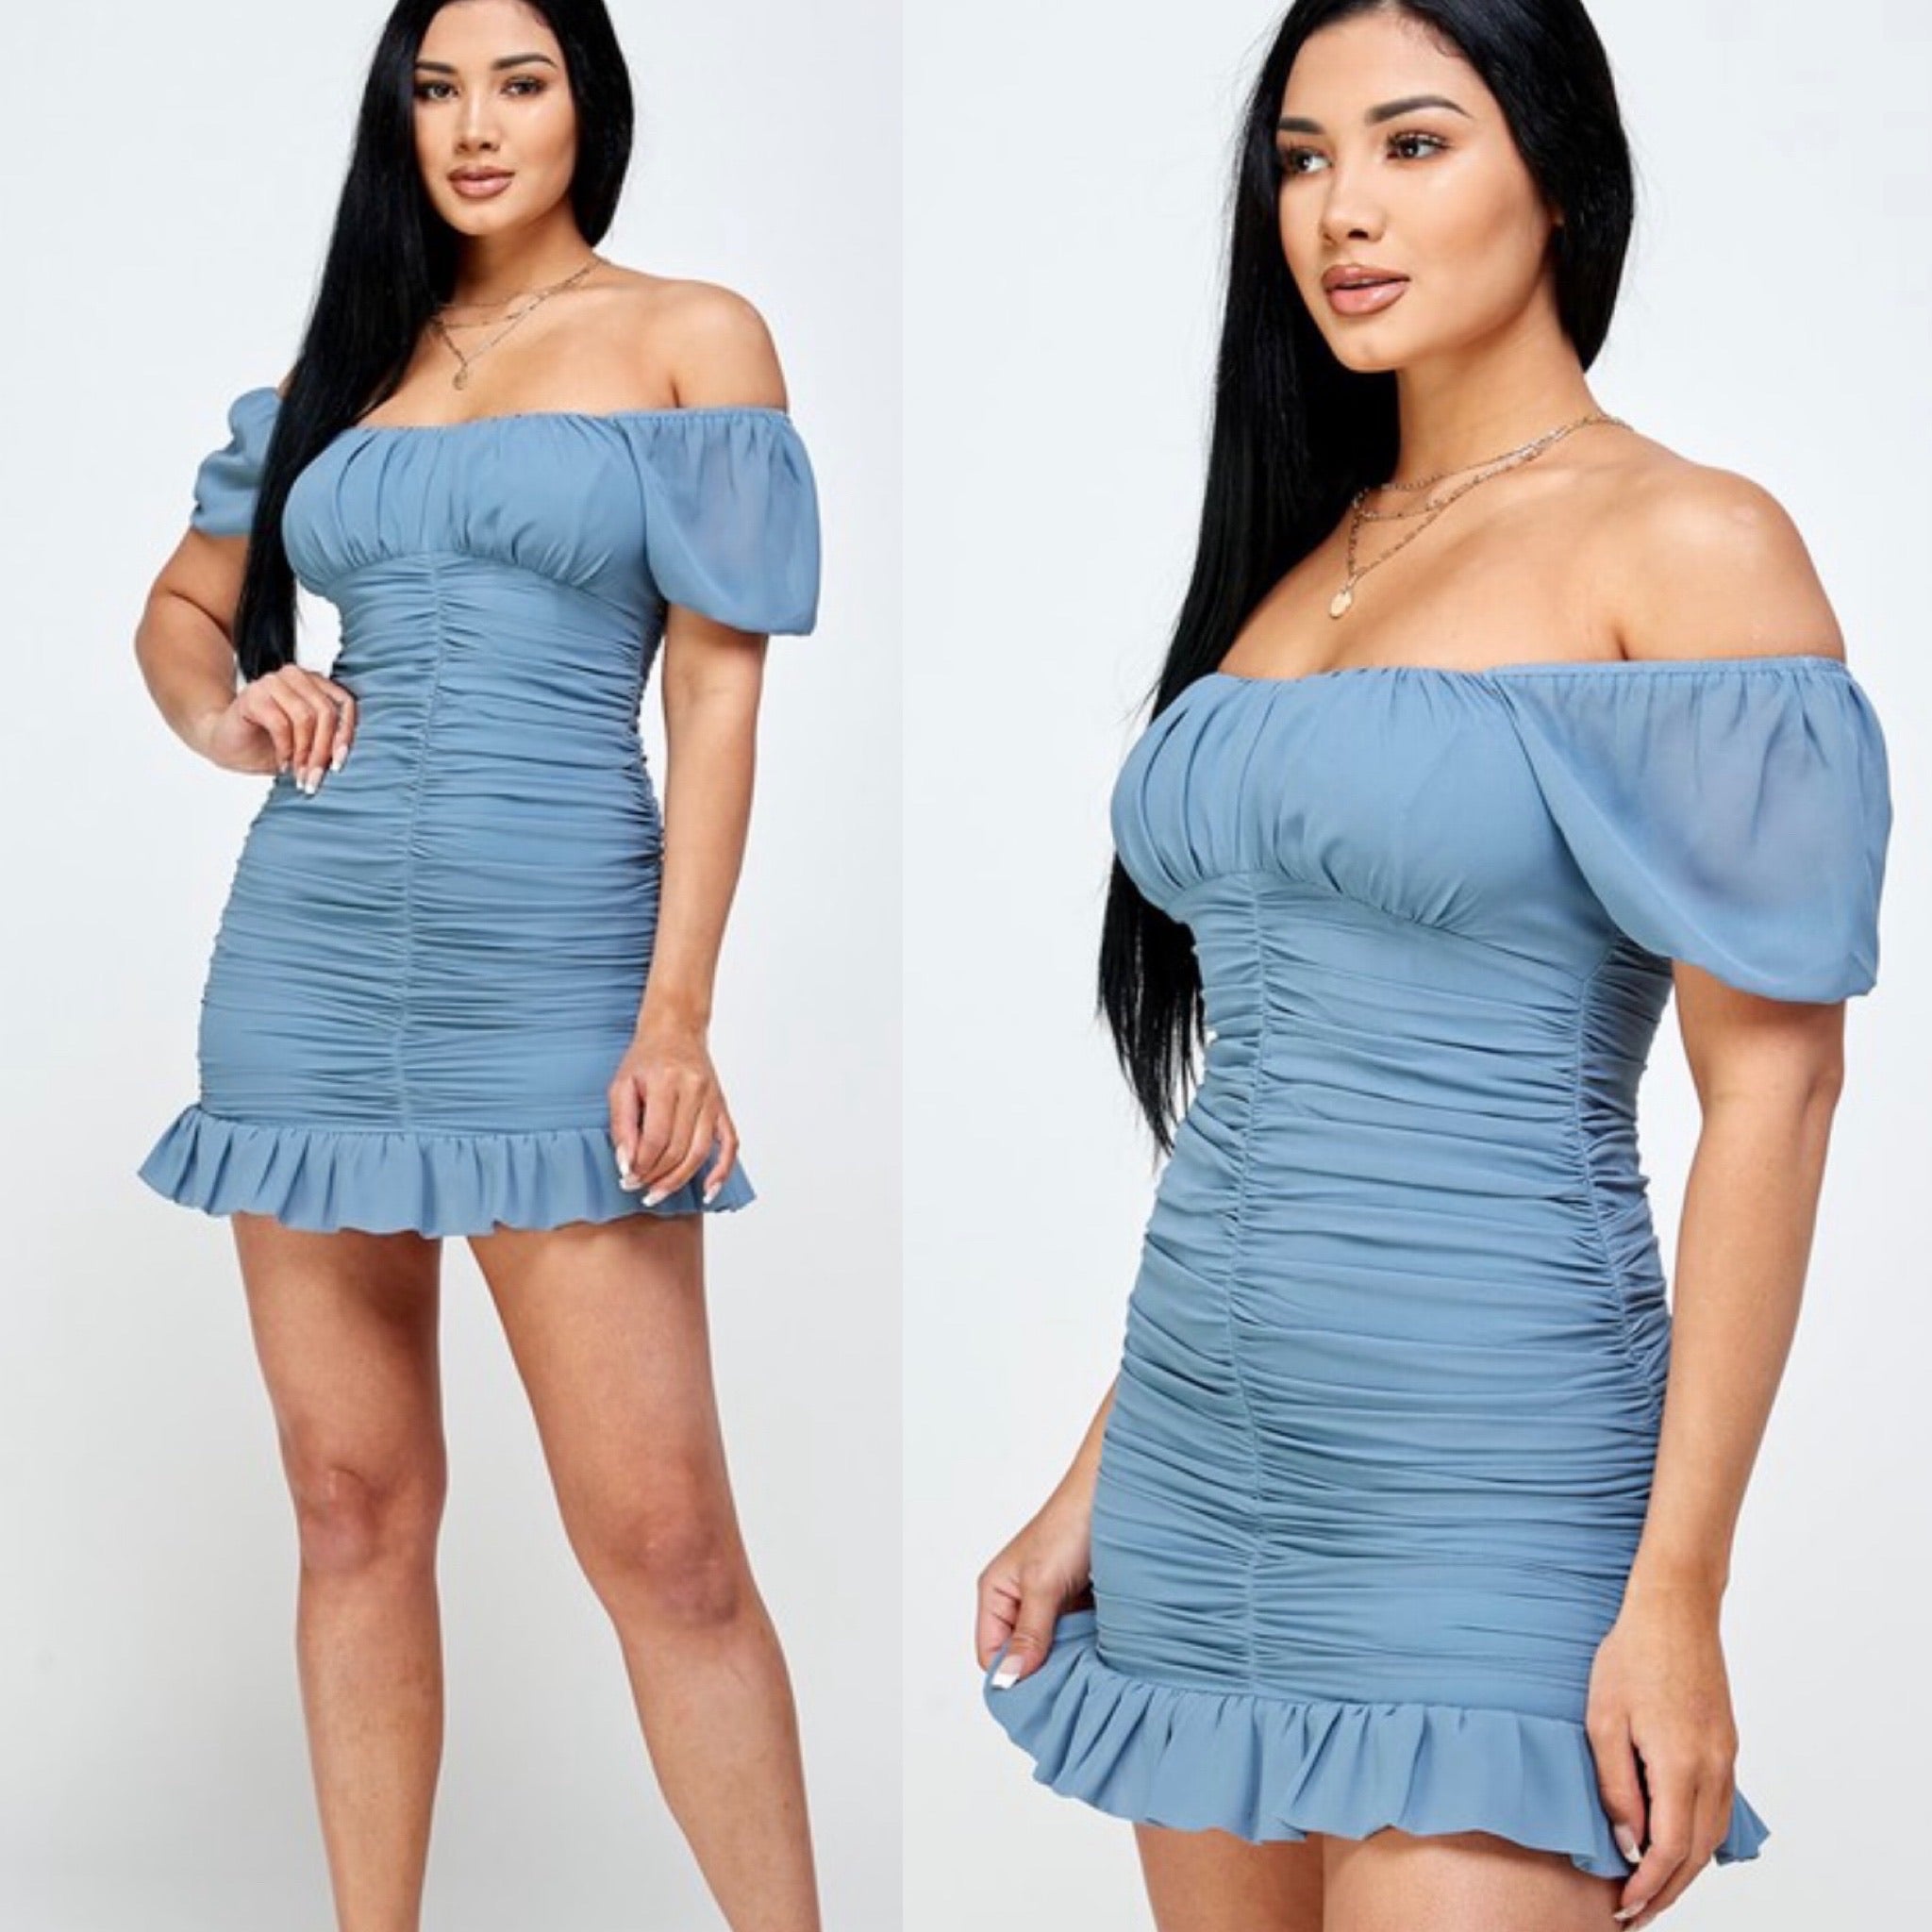 The “Isabella” Ruched Dress